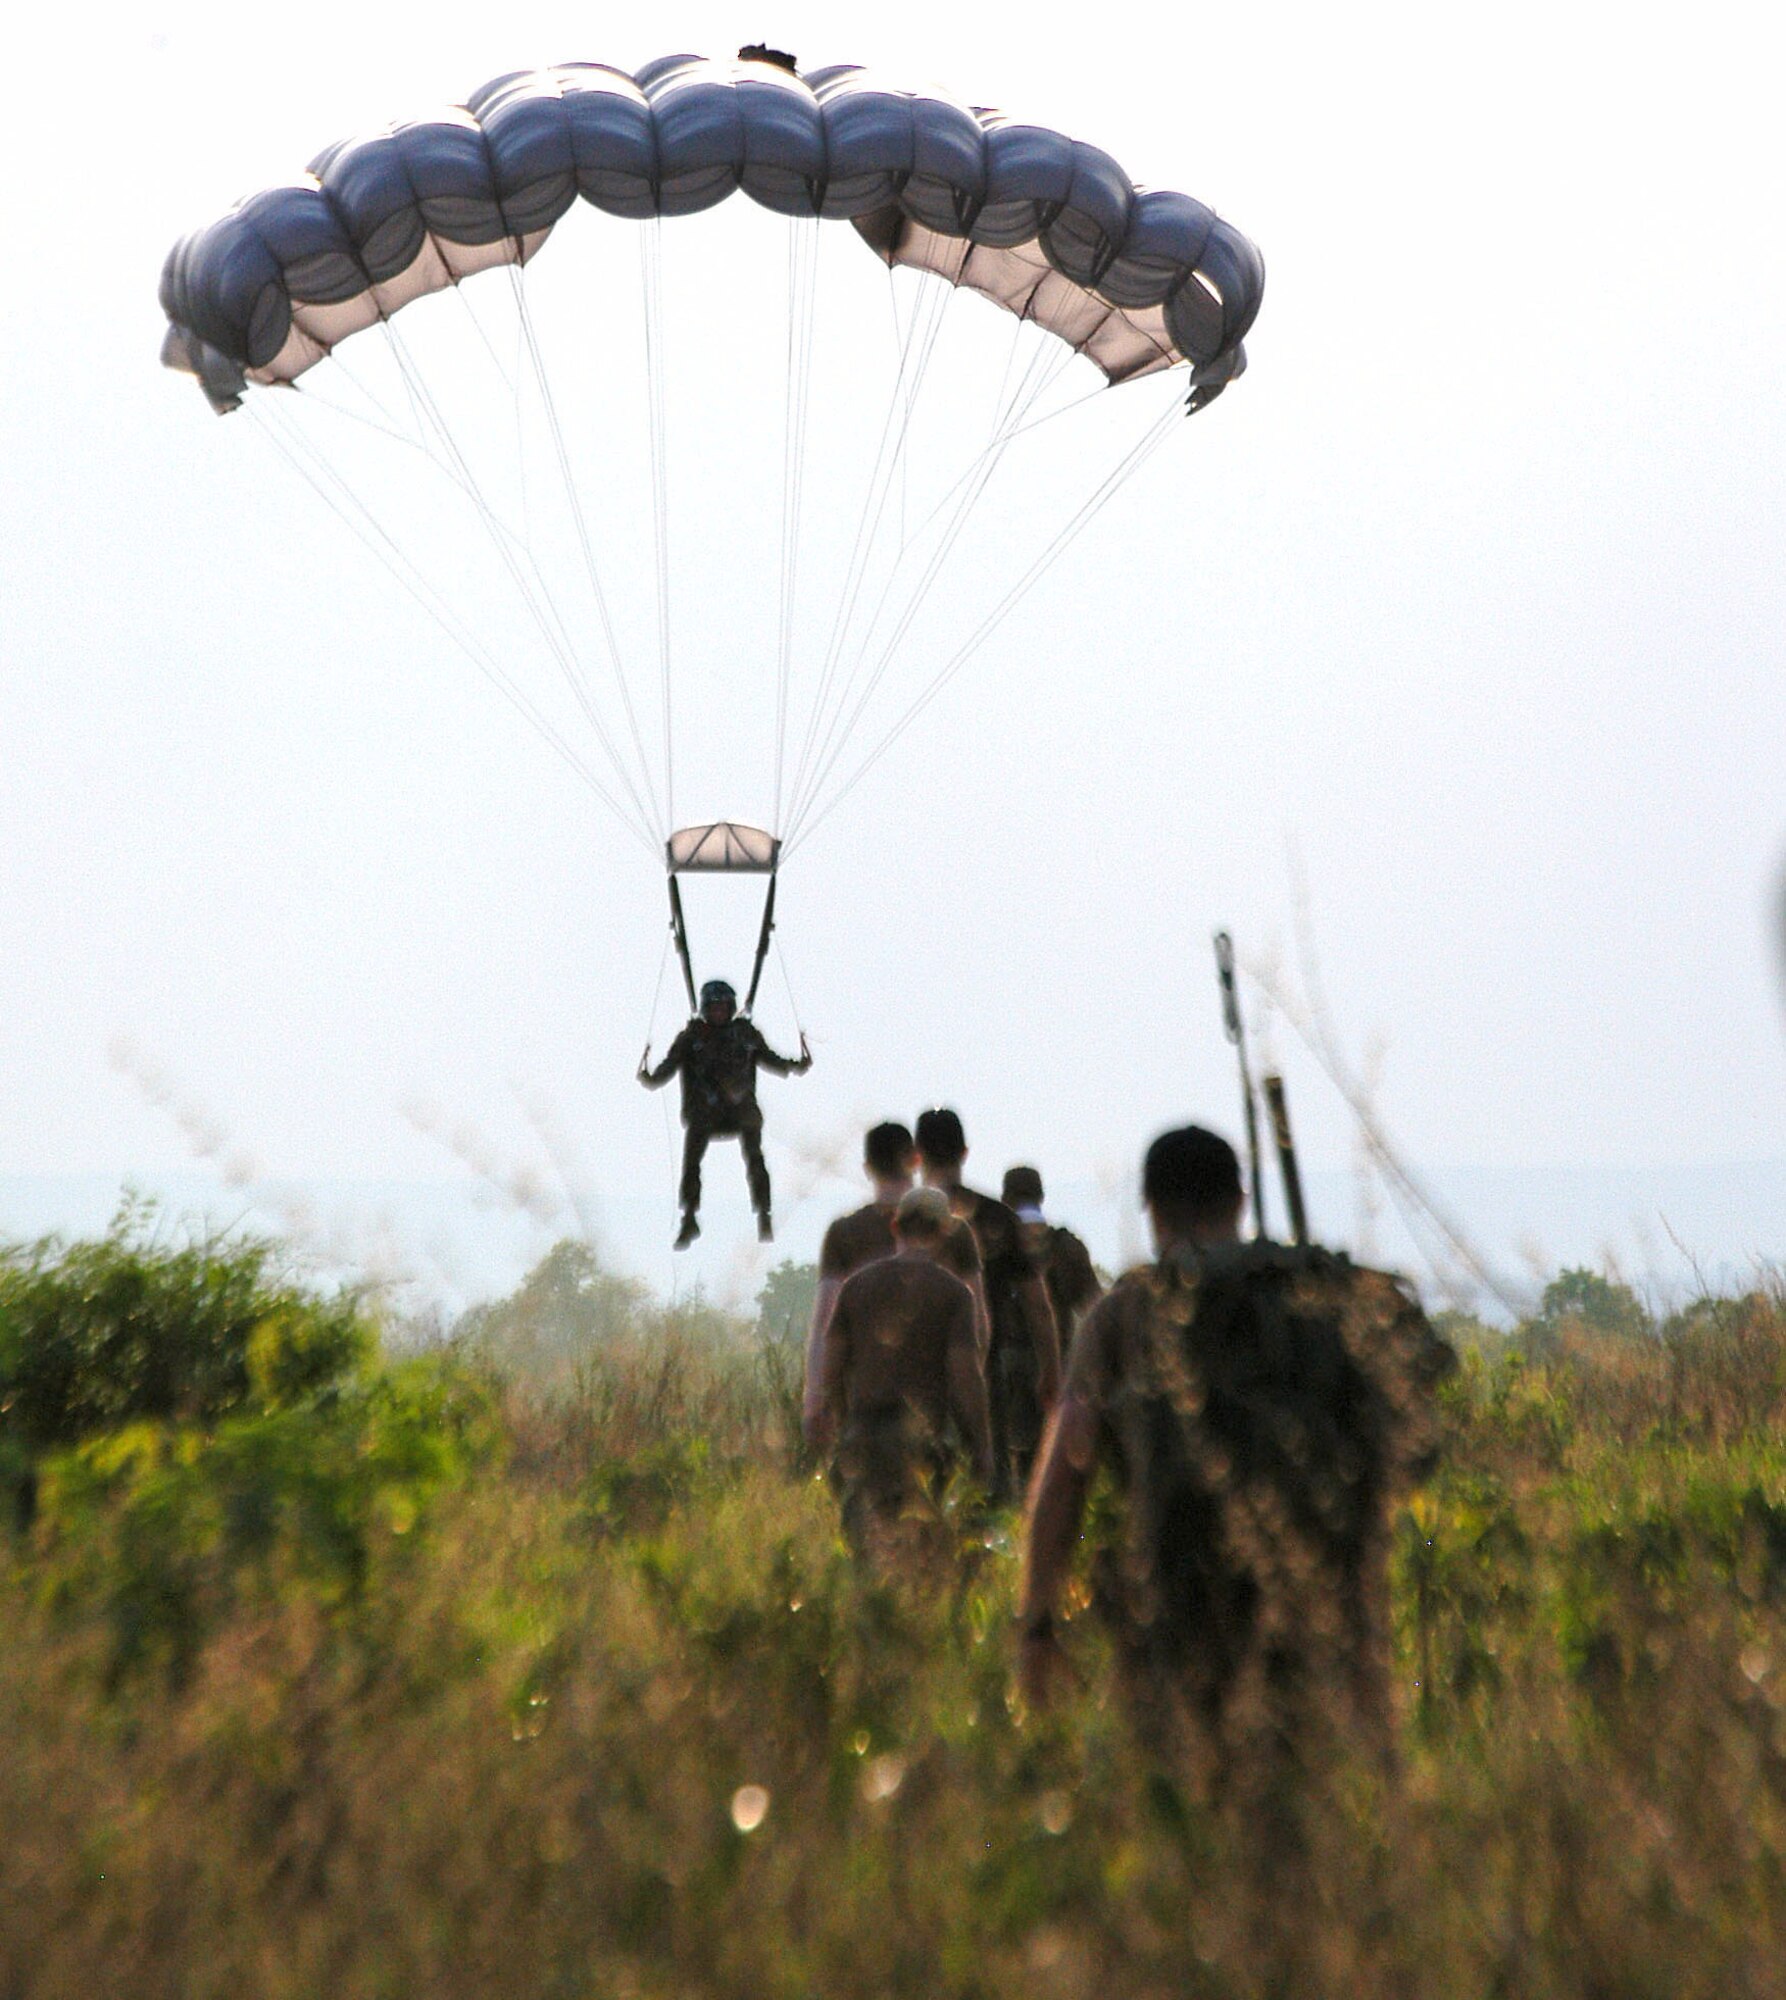 Drop zone controllers head out to recover a jumper from the 320th Special Tactics Squadron during Exercise Teak Torch at Udon Thani, Thailand. Jumpers from both the 353rd Special Operations Group and the Royal Thai air force completed daily "friendship jumps" as part of the joint combined exercise training. (U.S. Air Force photo/Master Sgt. Marilyn Holliday)                            